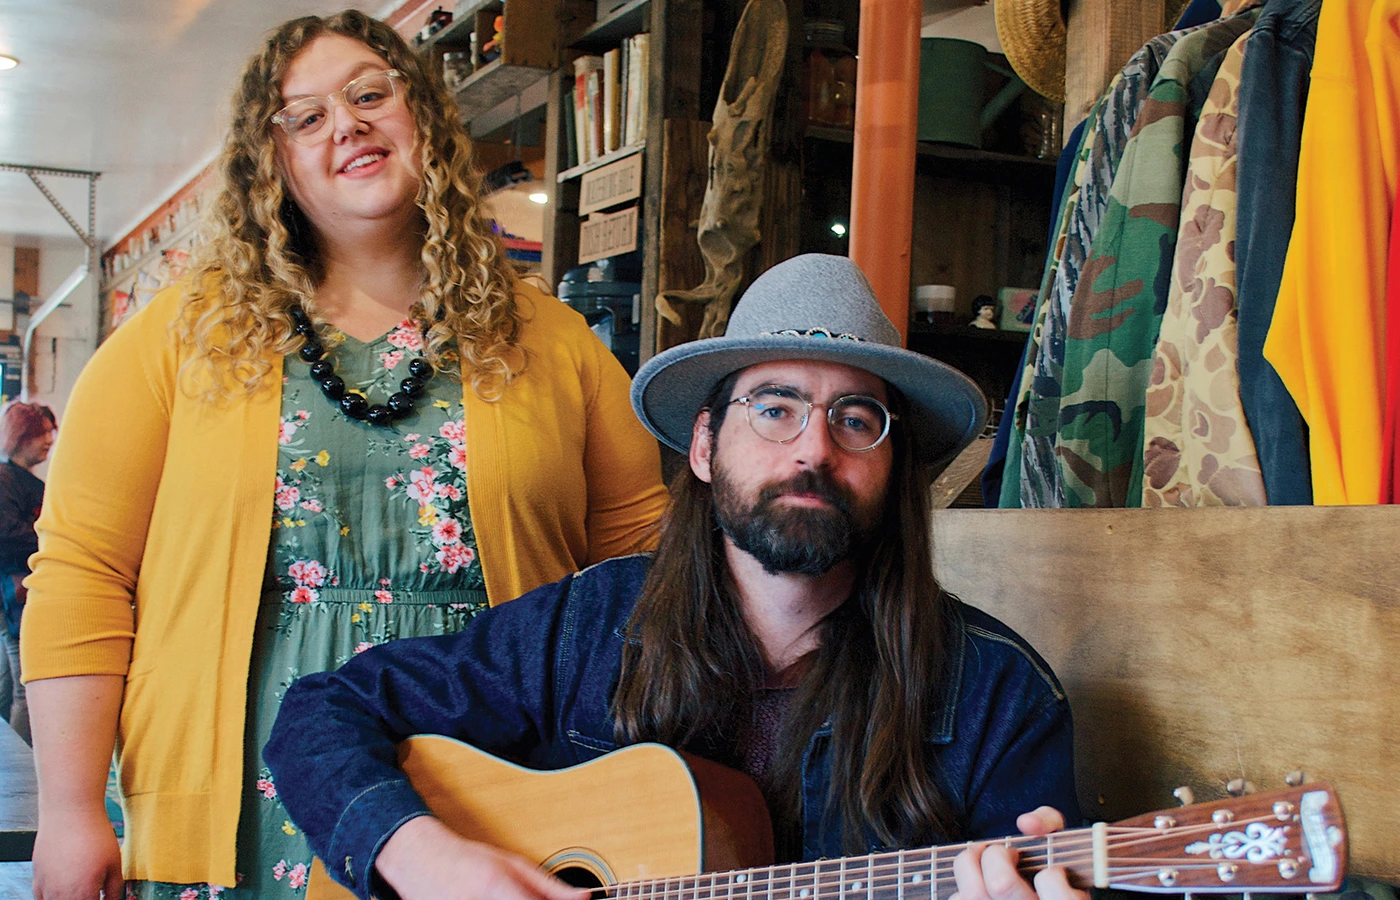 (L–R) Claire Darling and Thom Debonair combine folk, blues and soul notes into their acoustic duo, Darling & Debonair.